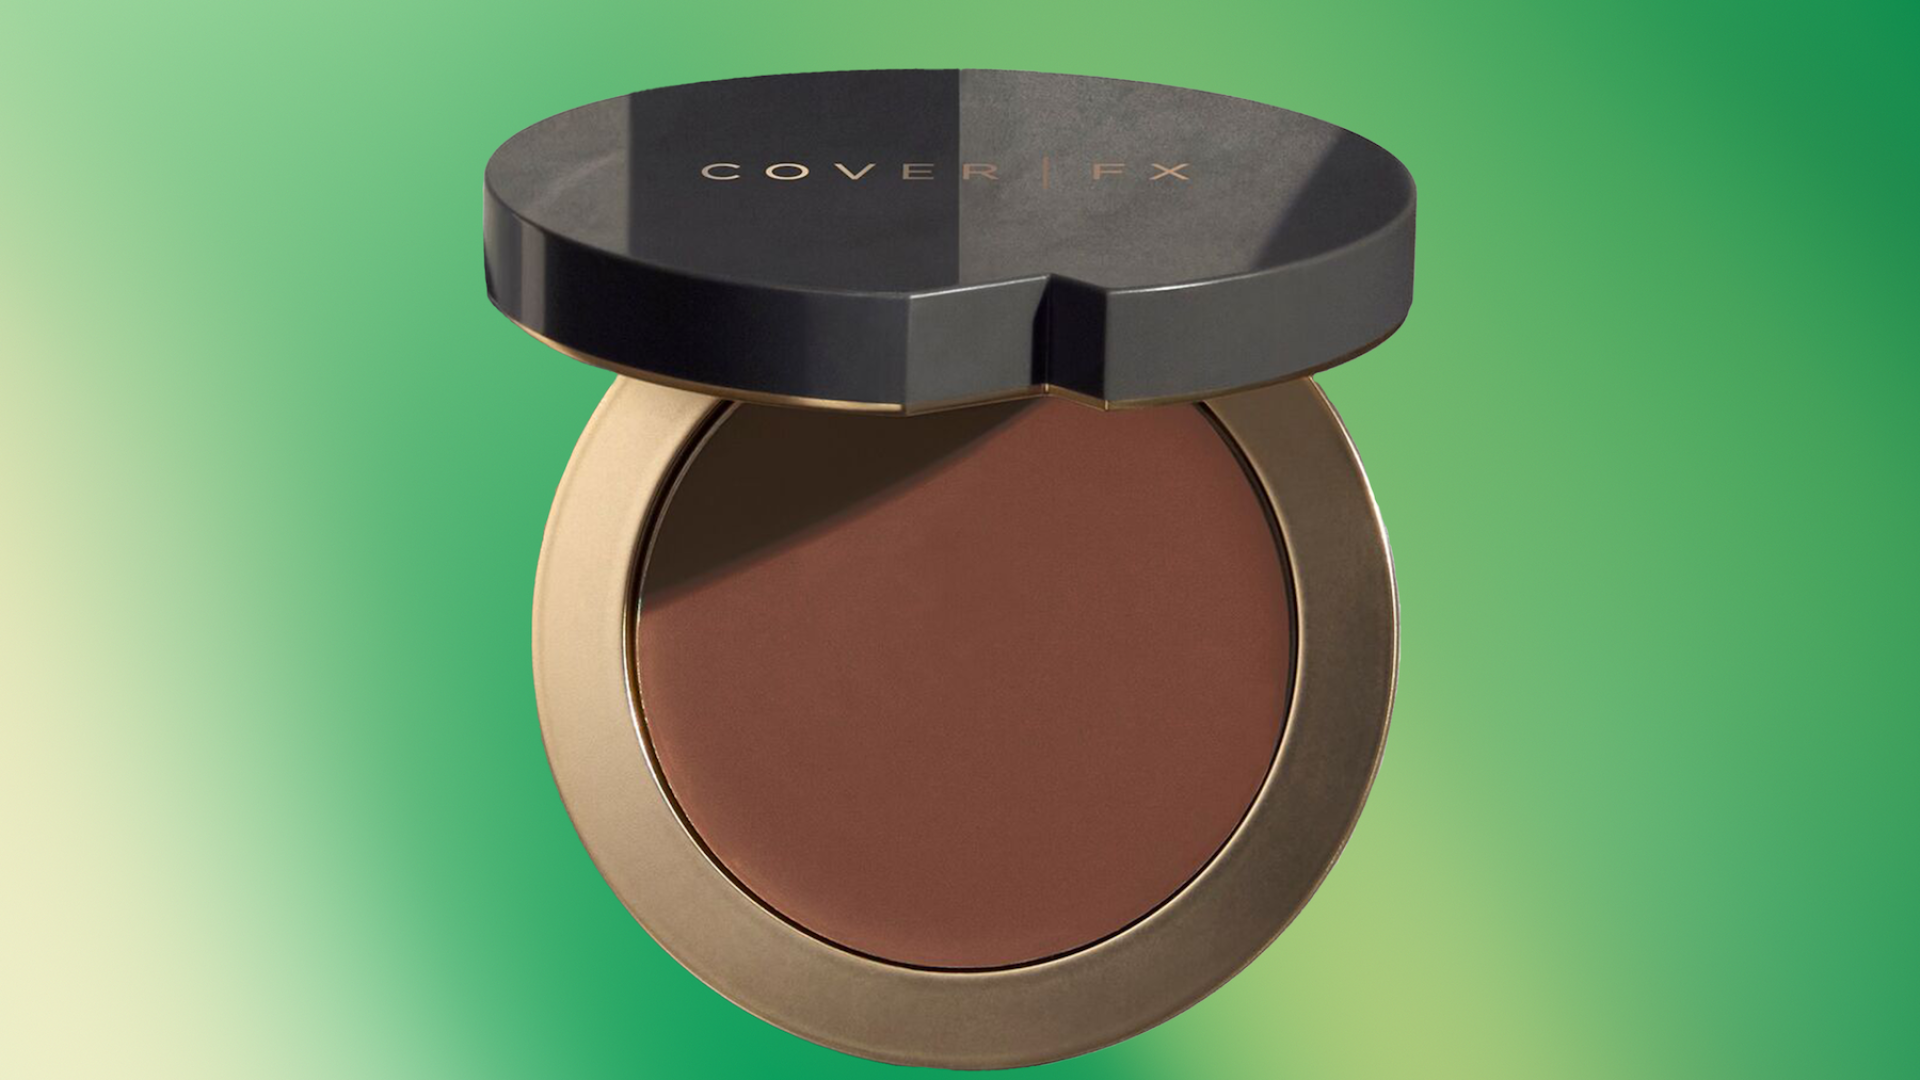 Product Of The Week: Cover FX Total Cover Cream Foundation